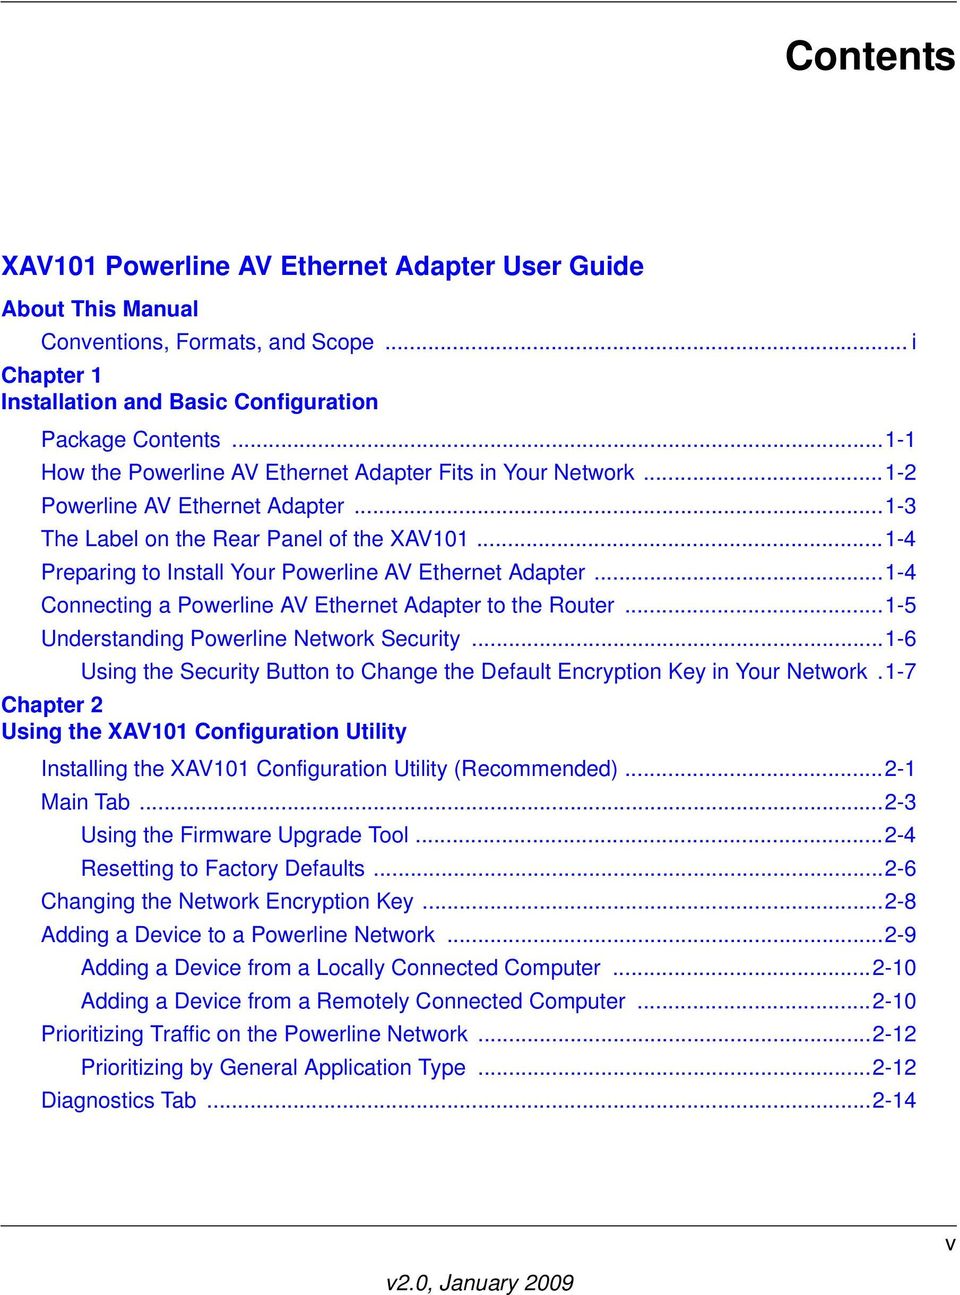 ..1-4 Preparing to Install Your Powerline AV Ethernet Adapter...1-4 Connecting a Powerline AV Ethernet Adapter to the Router...1-5 Understanding Powerline Network Security.